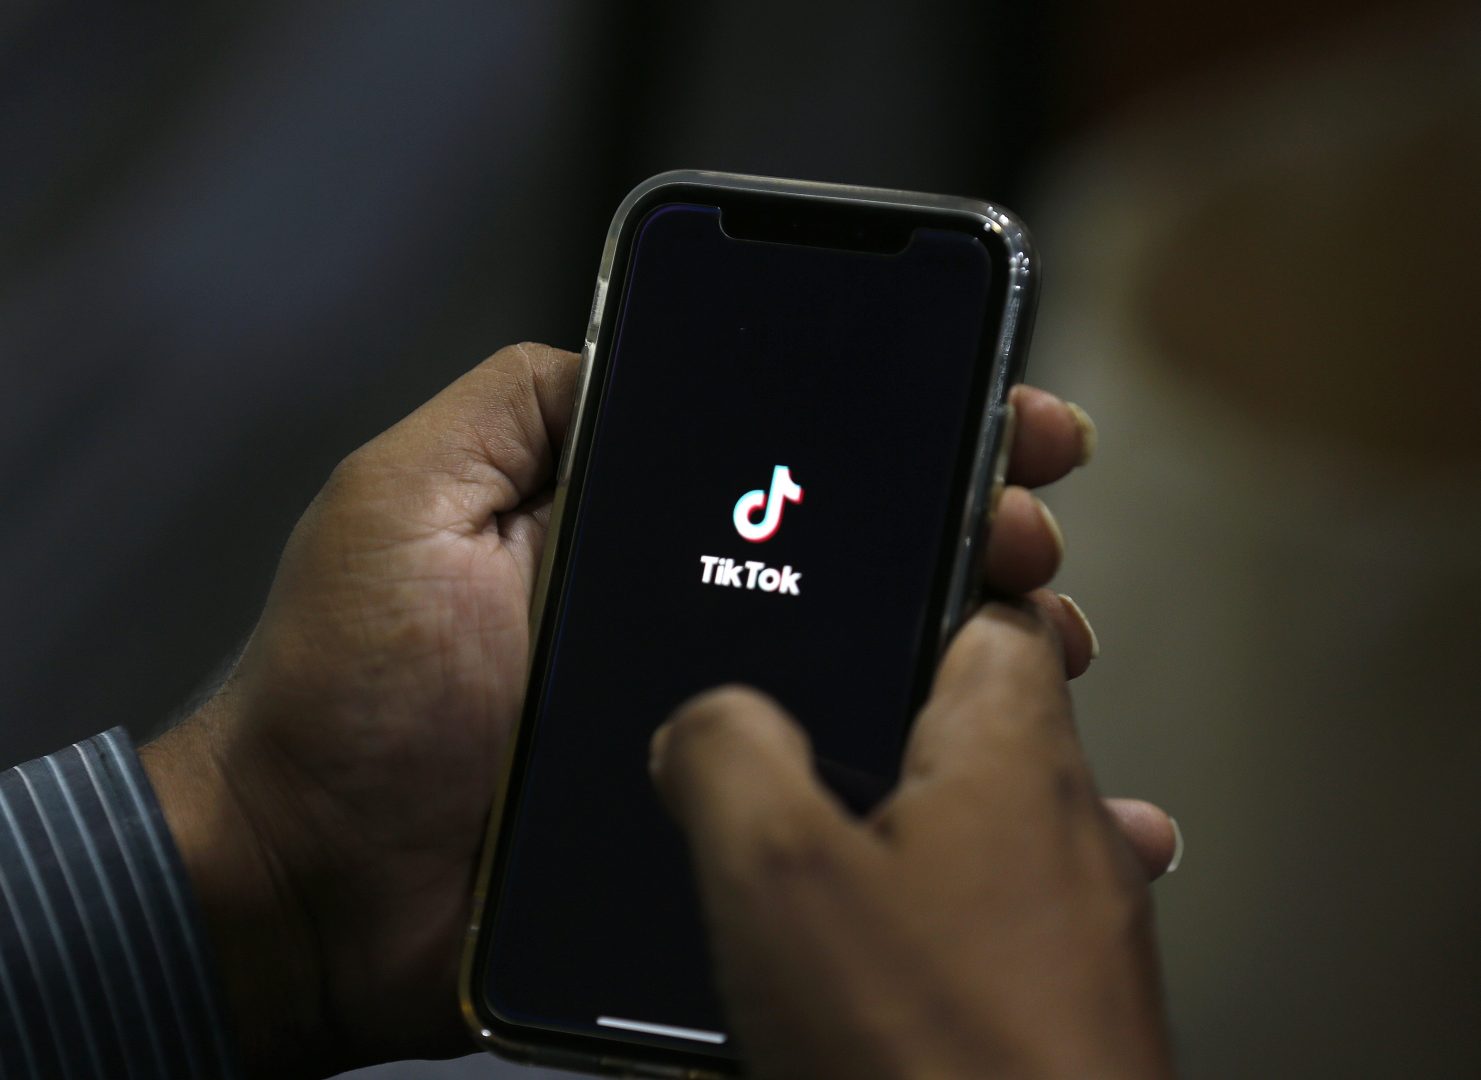 A man opens social media app 'TikTok' on his cell phone, in Islamabad, Pakistan, Tuesday, July 21, 2020. Pakistan has threatened the China-linked TikTok video service and blocked the Singapore-based Bigo Live streaming platform, citing what the regulating authority called widespread complaints about 